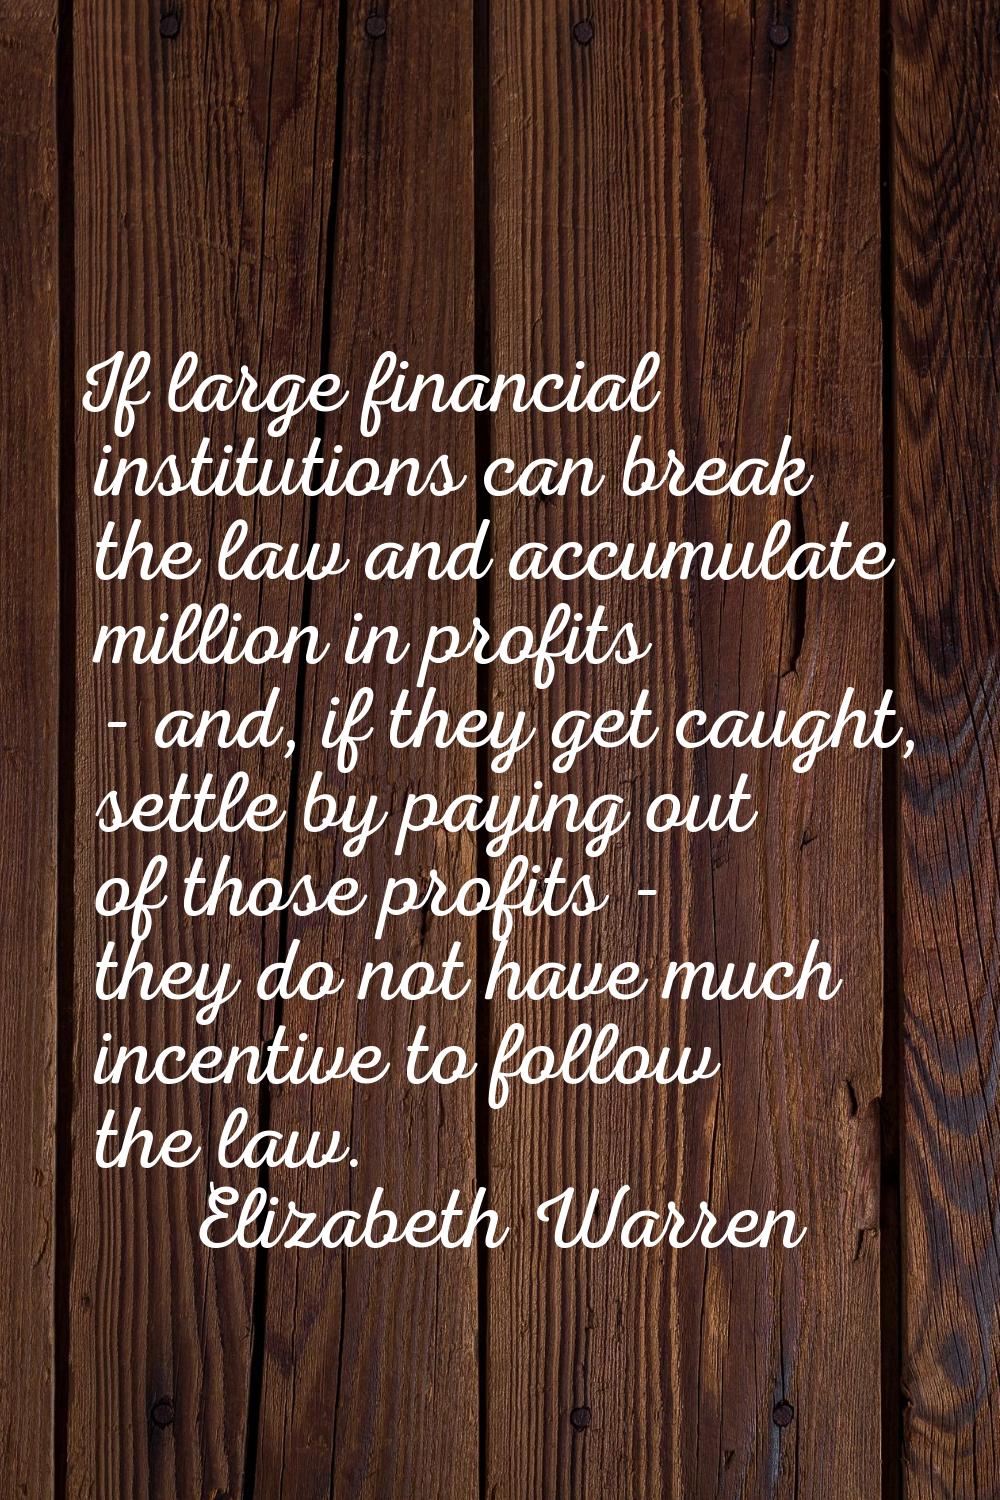 If large financial institutions can break the law and accumulate million in profits - and, if they 